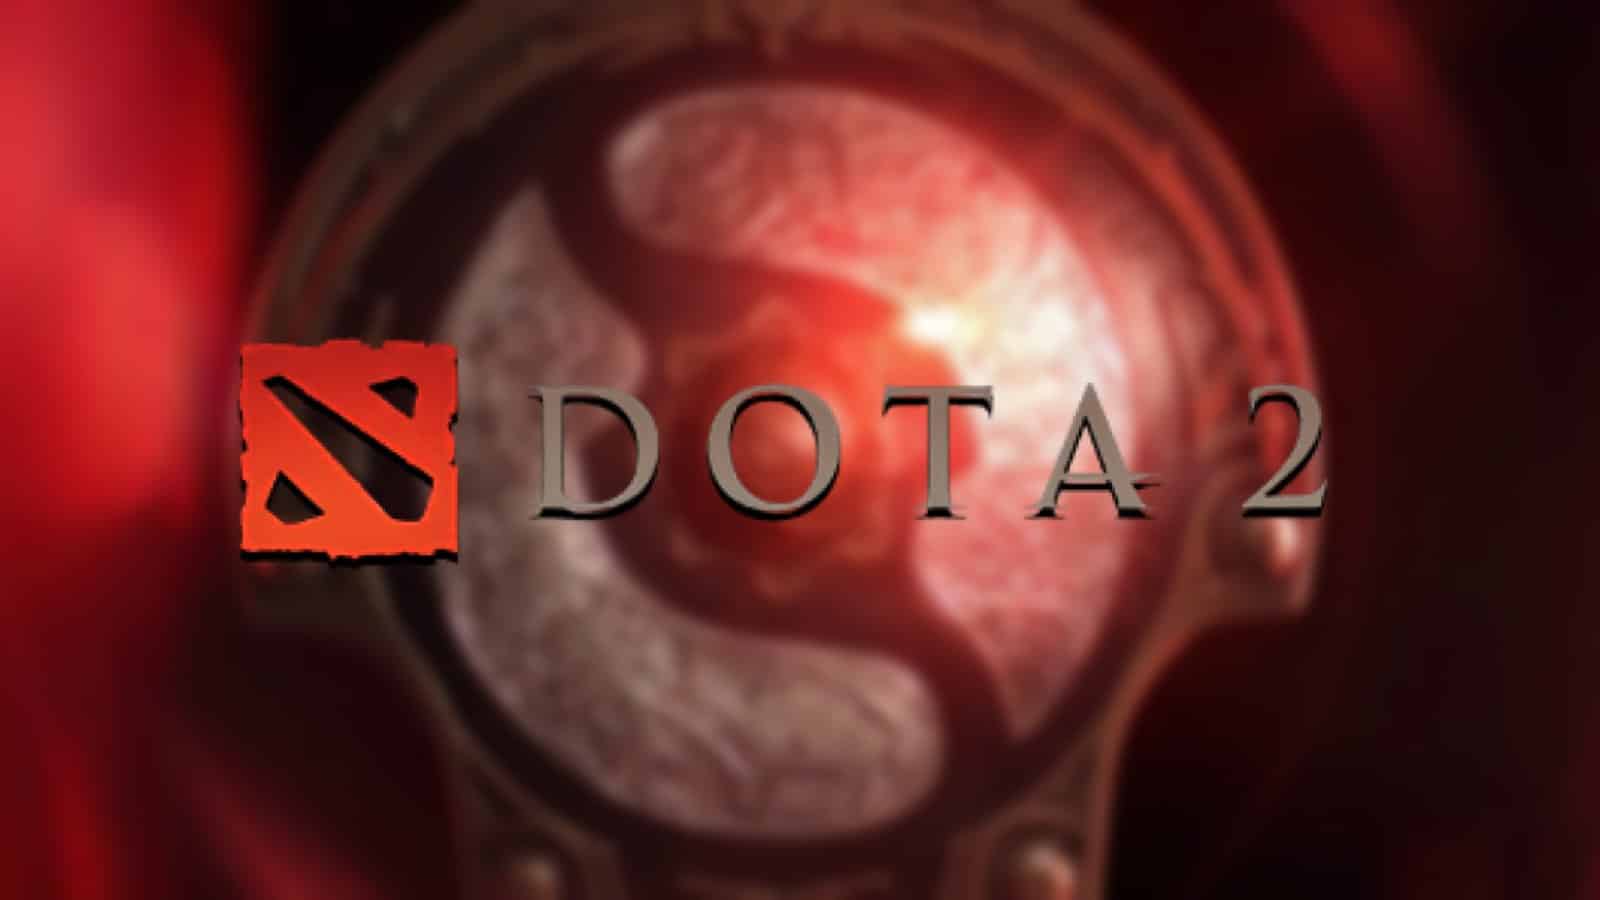 Dota 2 The International 11 Tundra crowned Champions after dominating Team Secret